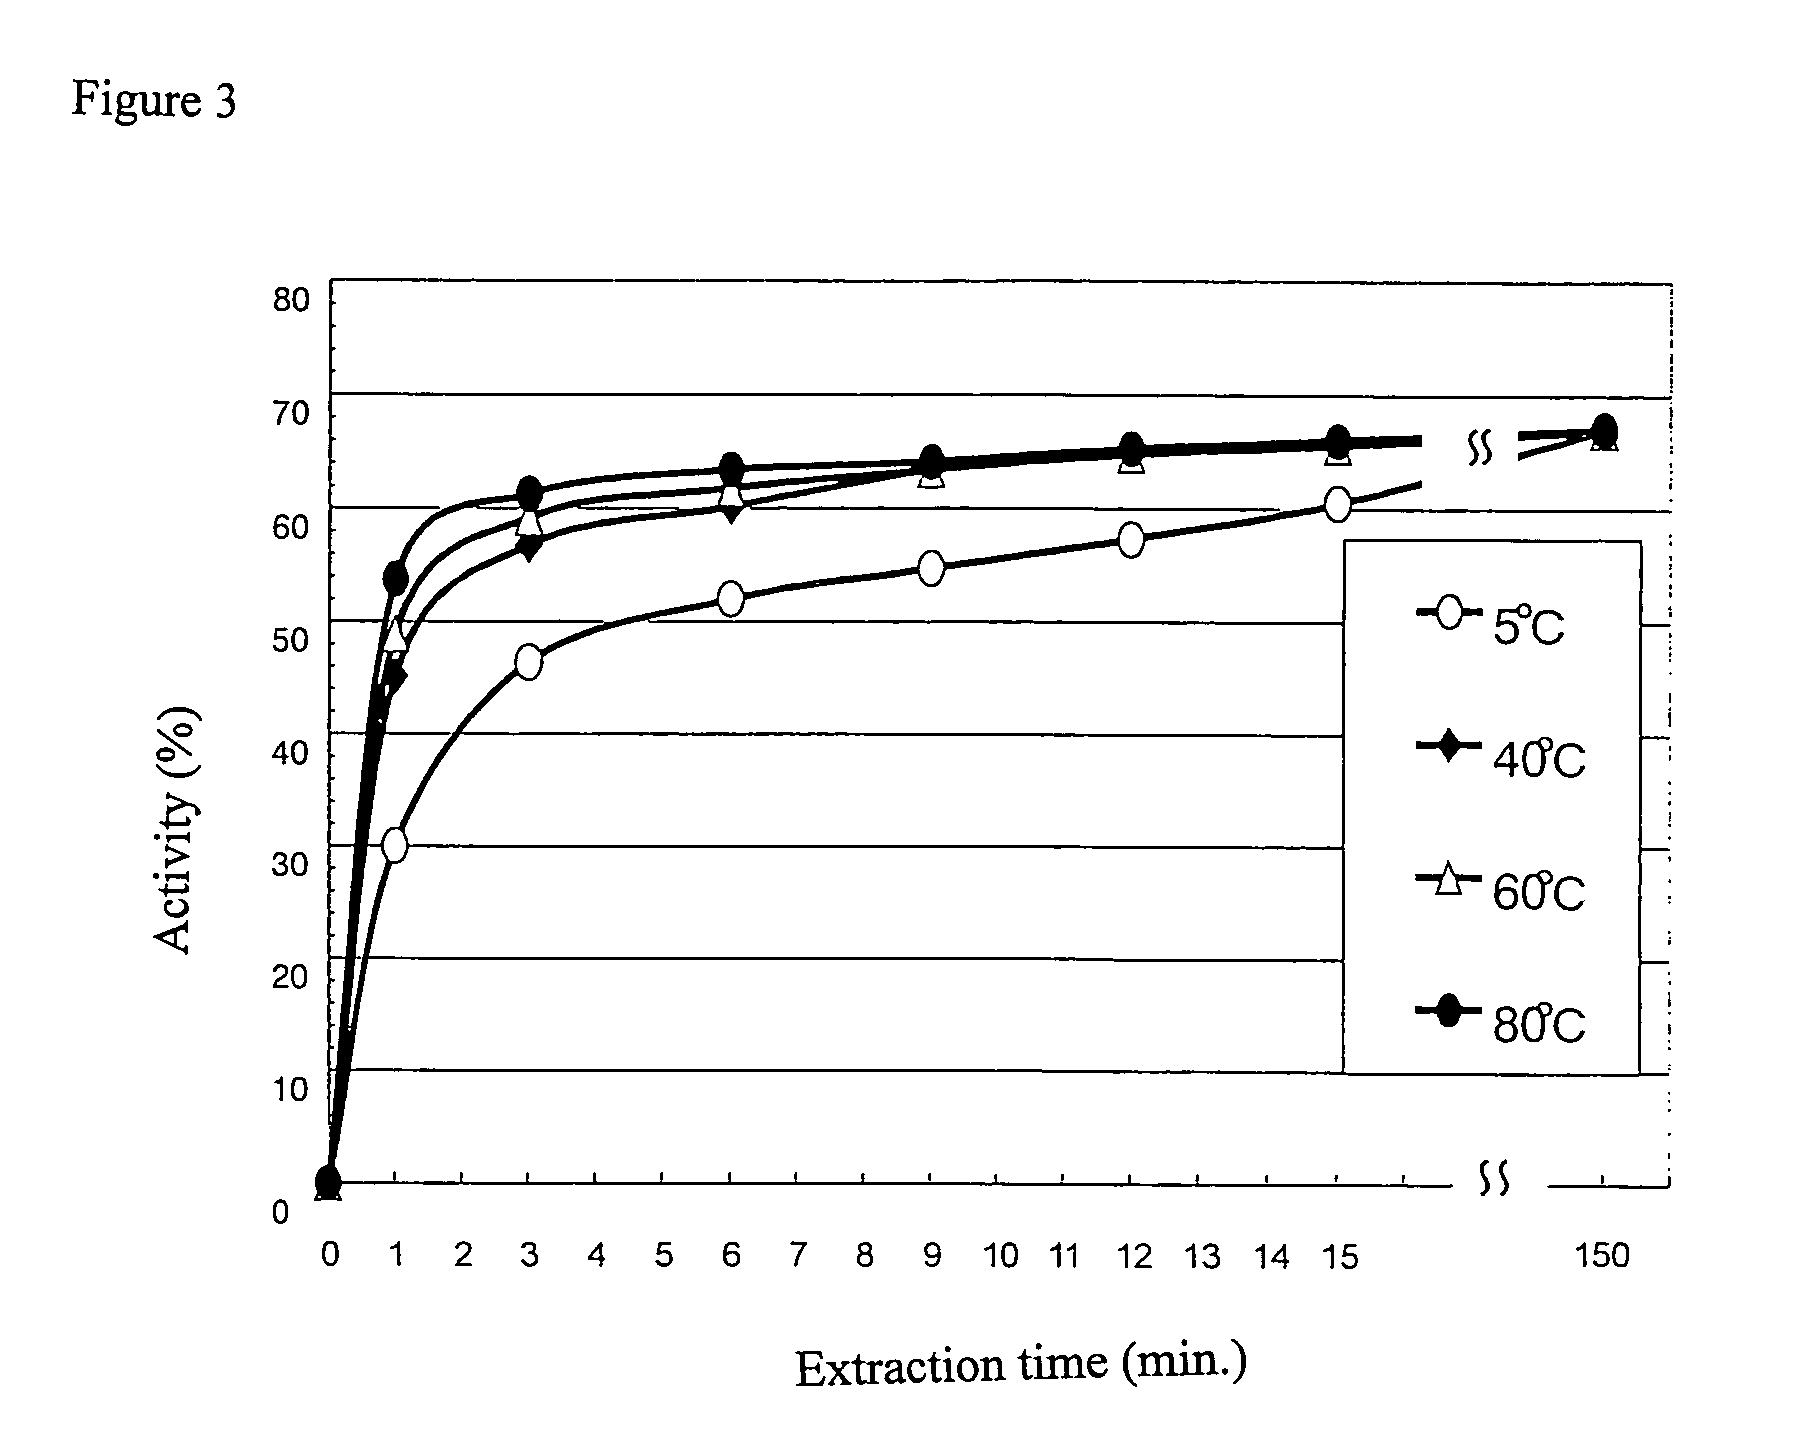 Process for producing food and beverage products from malt sprouts